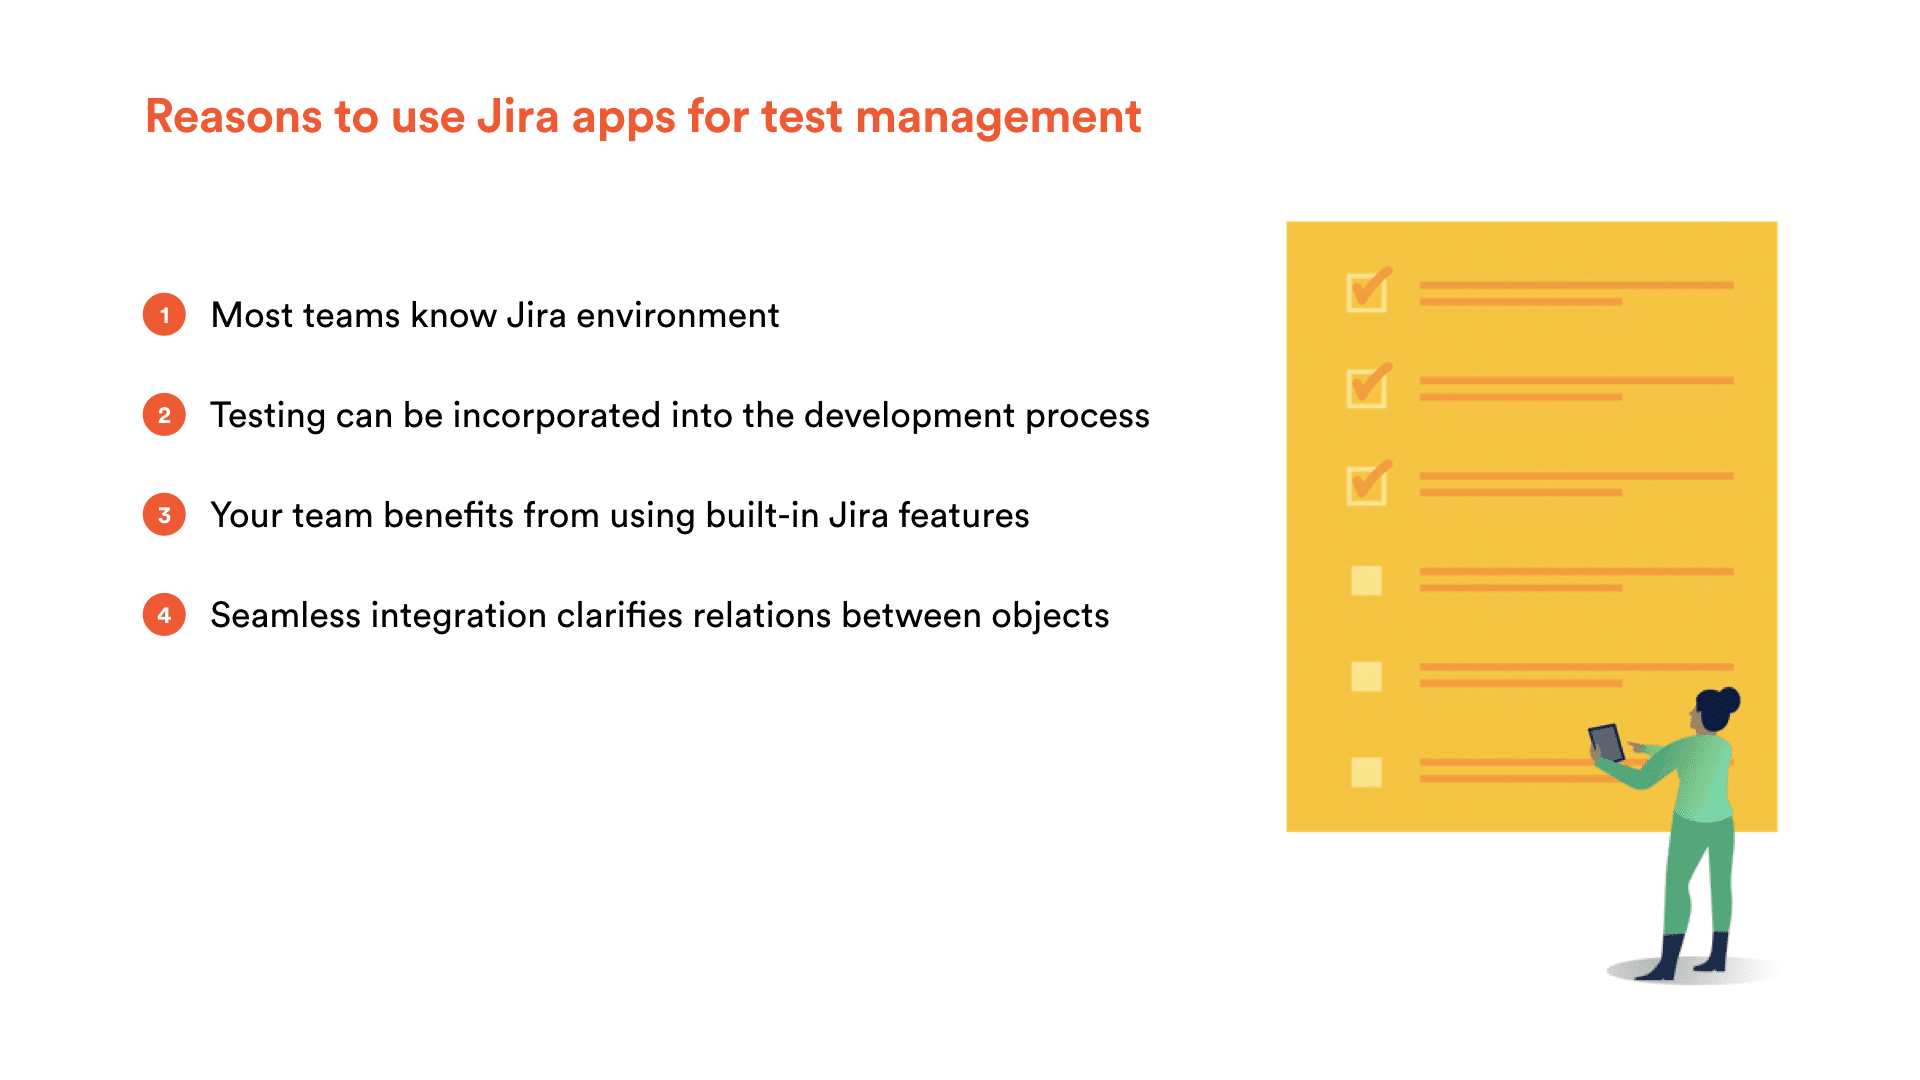 Reasons to use Jira apps for test management: 1. Most teams know Jira environment. 2. Testing can be incorporated into the development process. 3. Your team benefits from using built-in-Jira features. 4. Seamless integration clarifies relations between objects